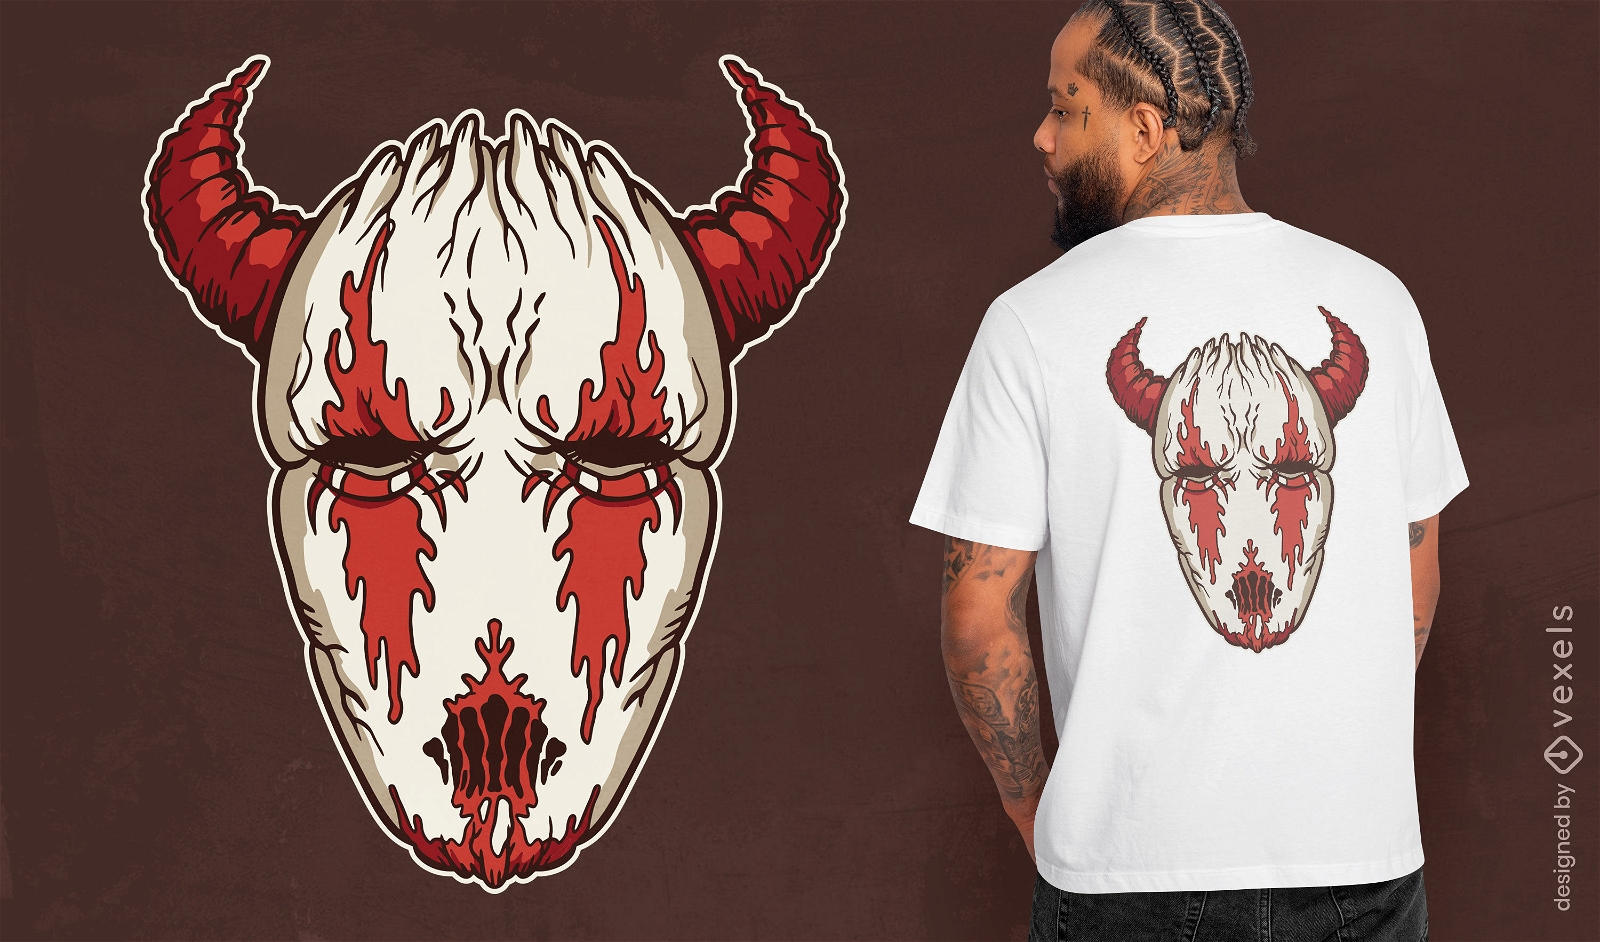 Diabolic mask with horns t-shirt design